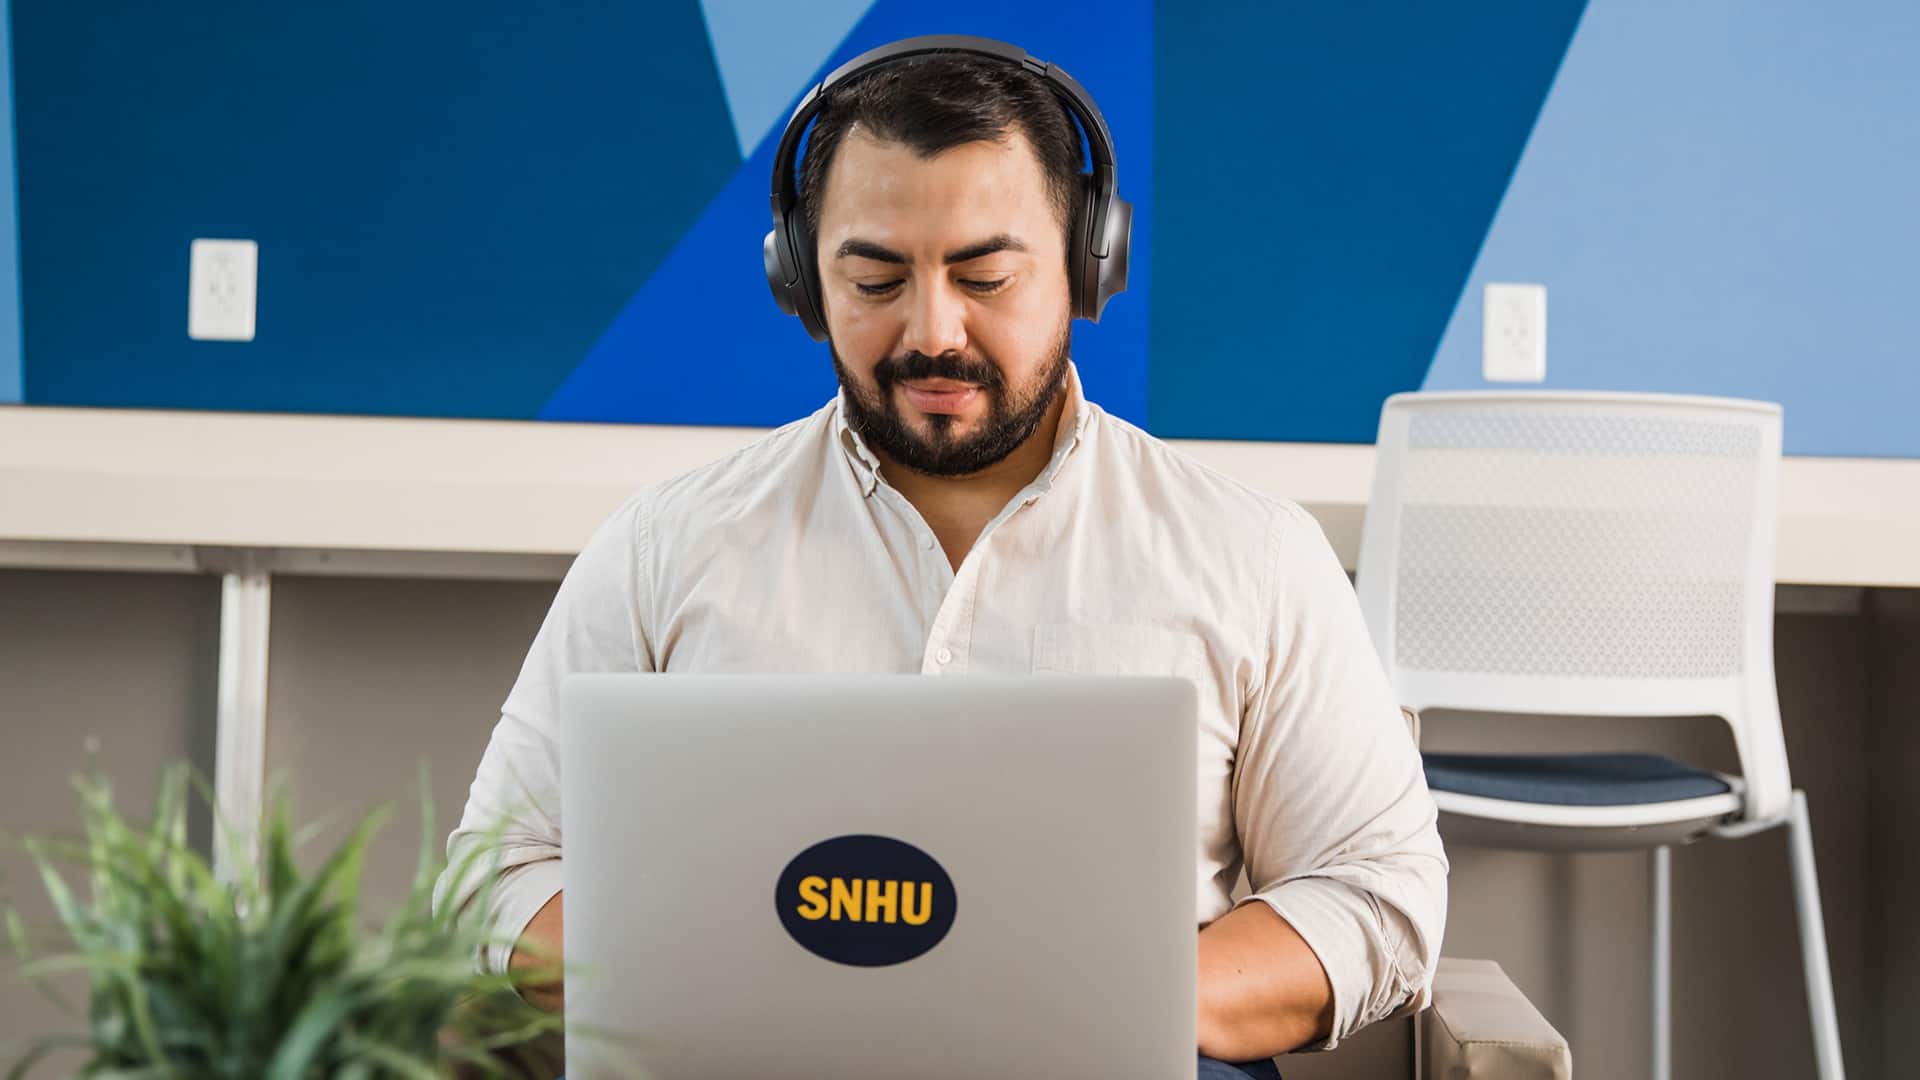 2021 Bachelor's in Graphic Design and Media Arts alum Jesus Suarez, wearing headphones while working from a laptop computer.